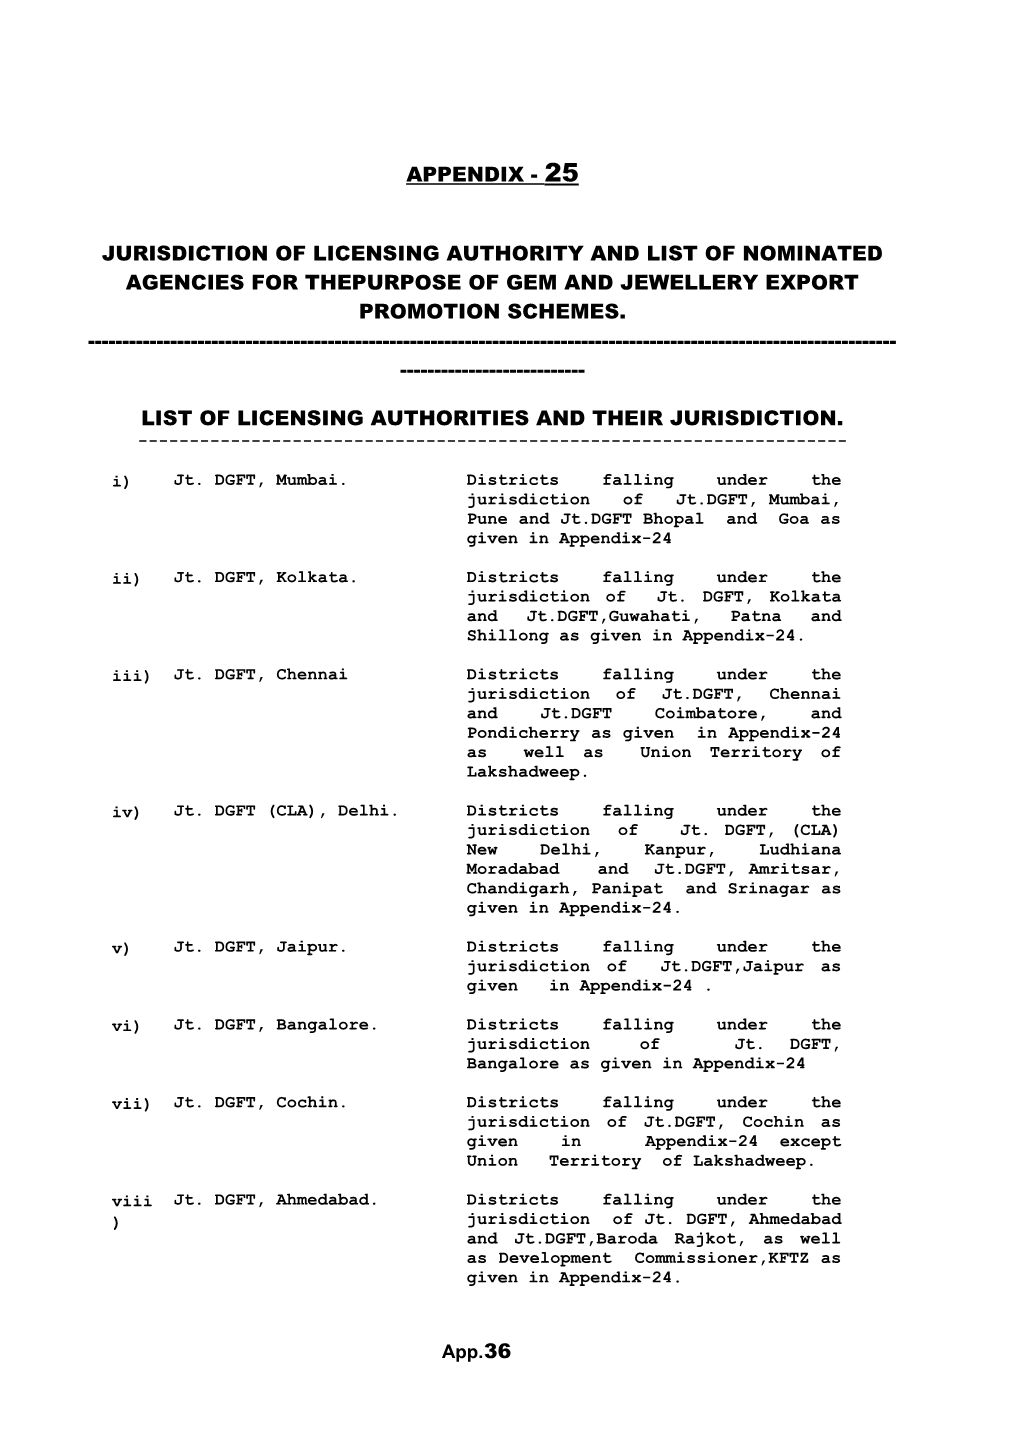 List of Licensing Authorities and Their Jurisdiction s1